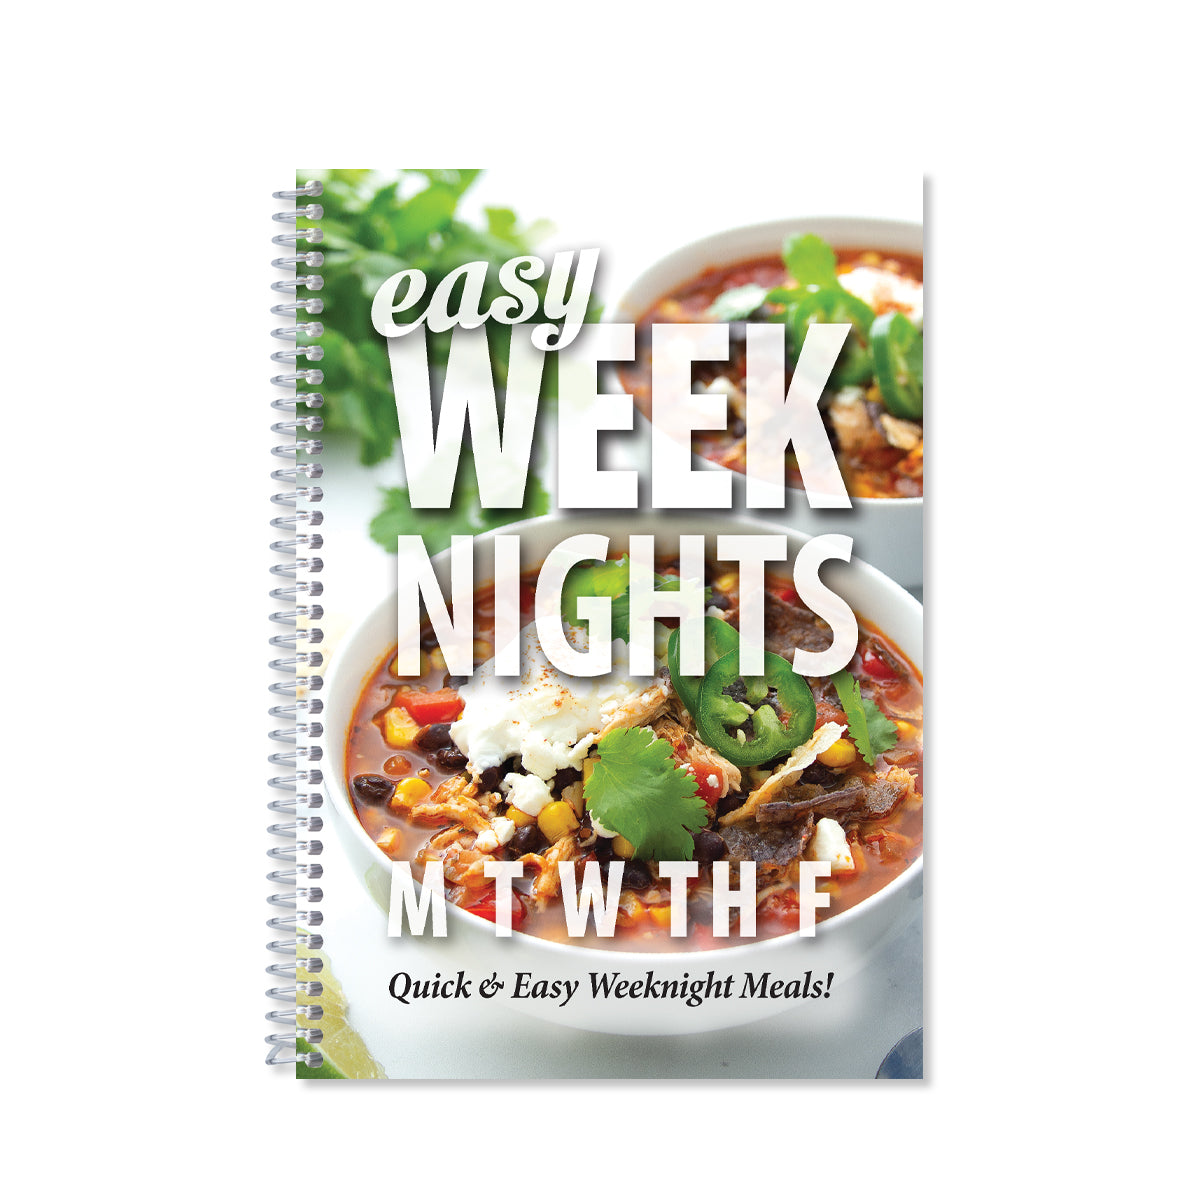 Cover of cookbook Easy Weeknights - Quick and easy weeknight meals! Cover shows two cups of chili.